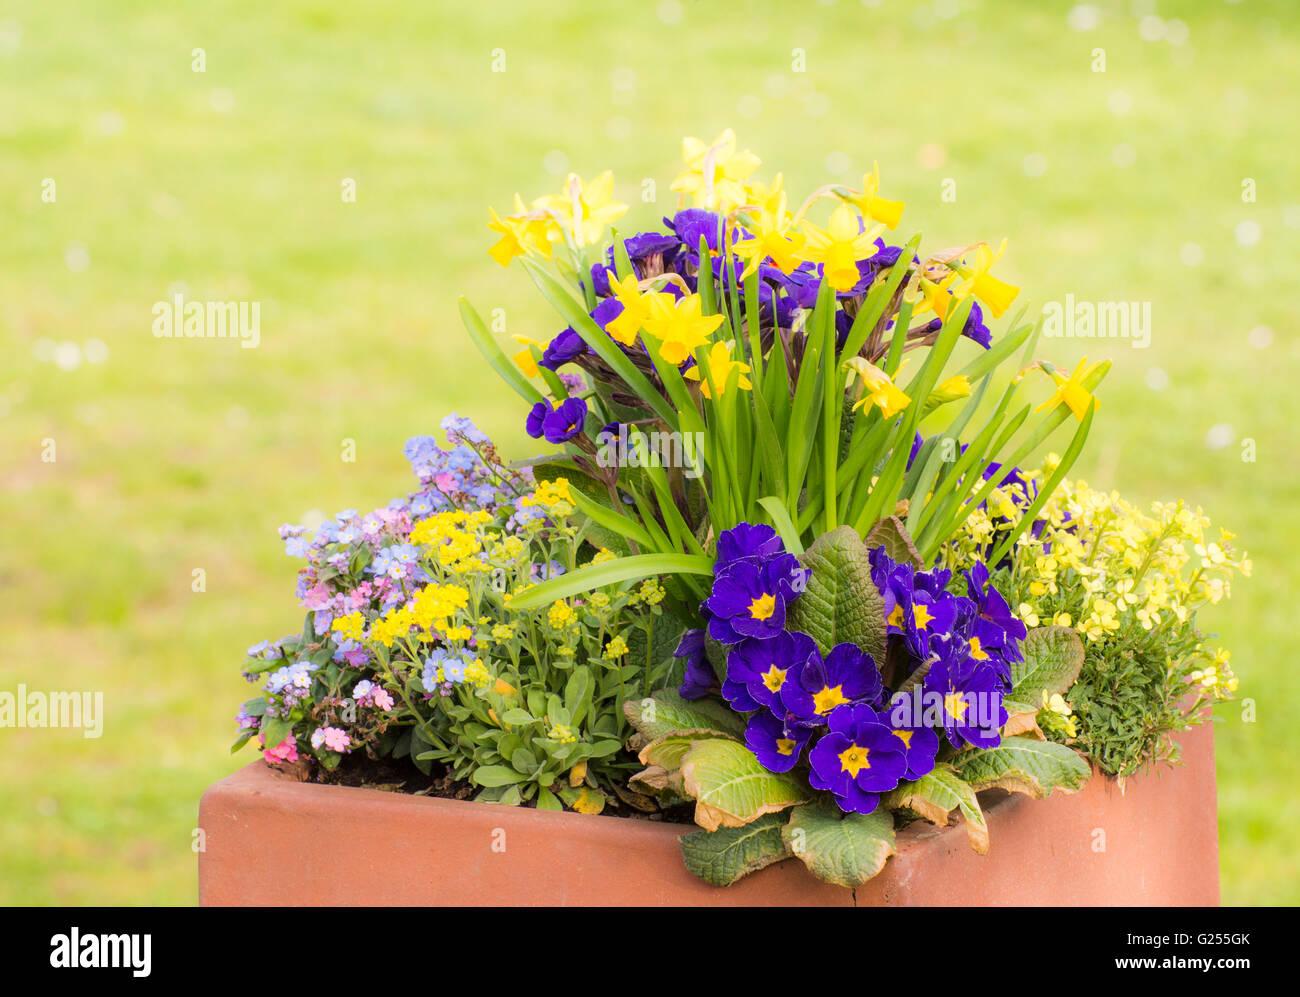 Rectangular flower pot in a park filled with pansies and daffodils Stock Photo